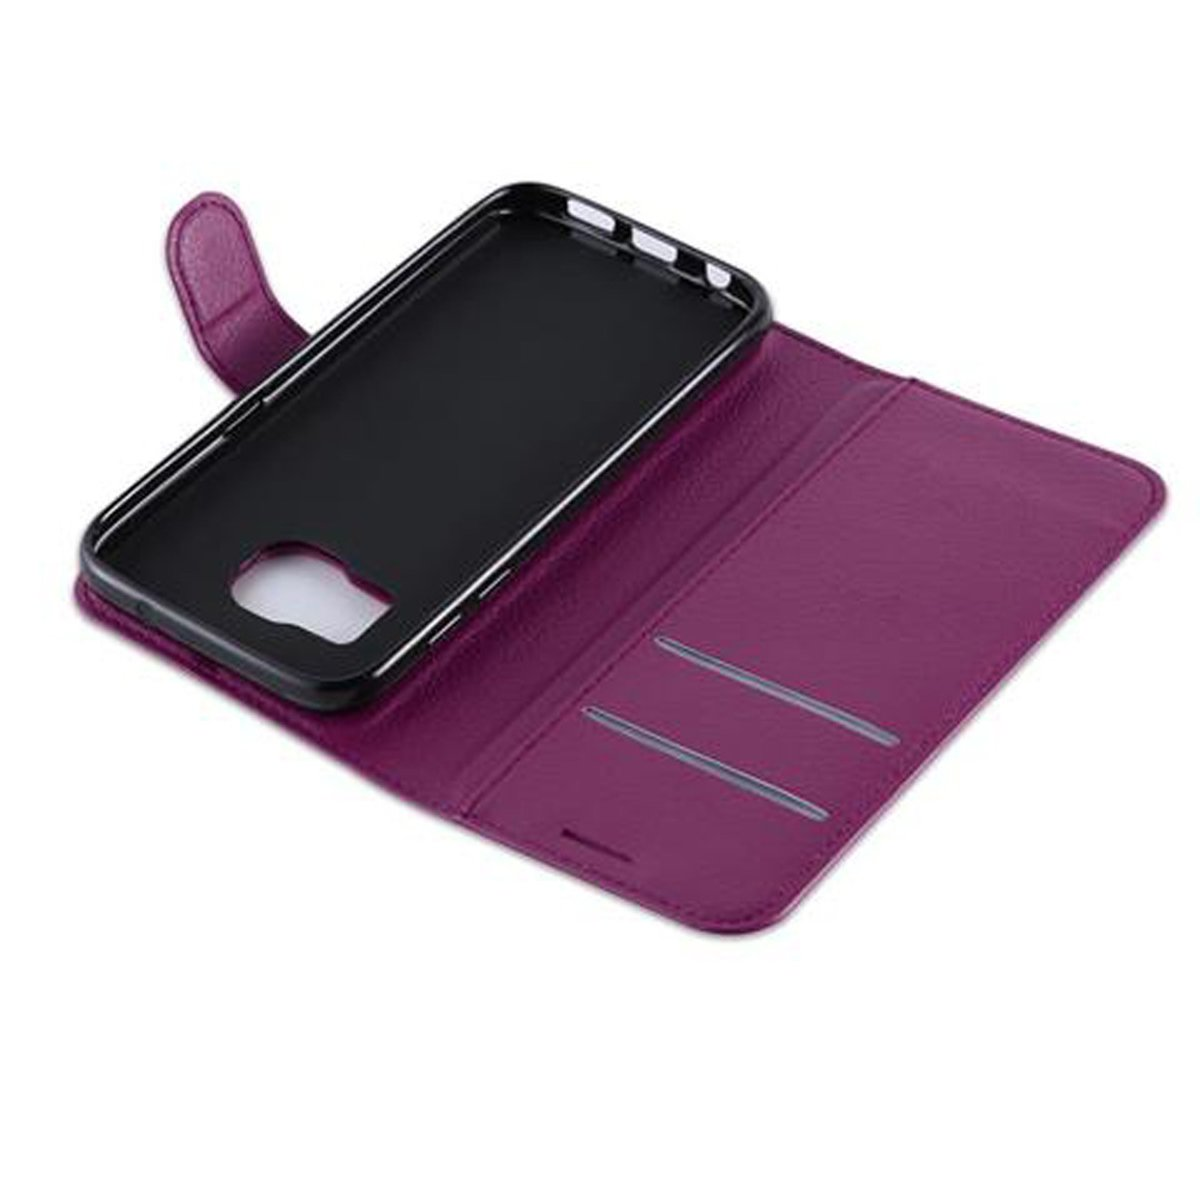 S7, Hülle Samsung, Book Standfunktion, MANGAN Galaxy CADORABO VIOLETT Bookcover,